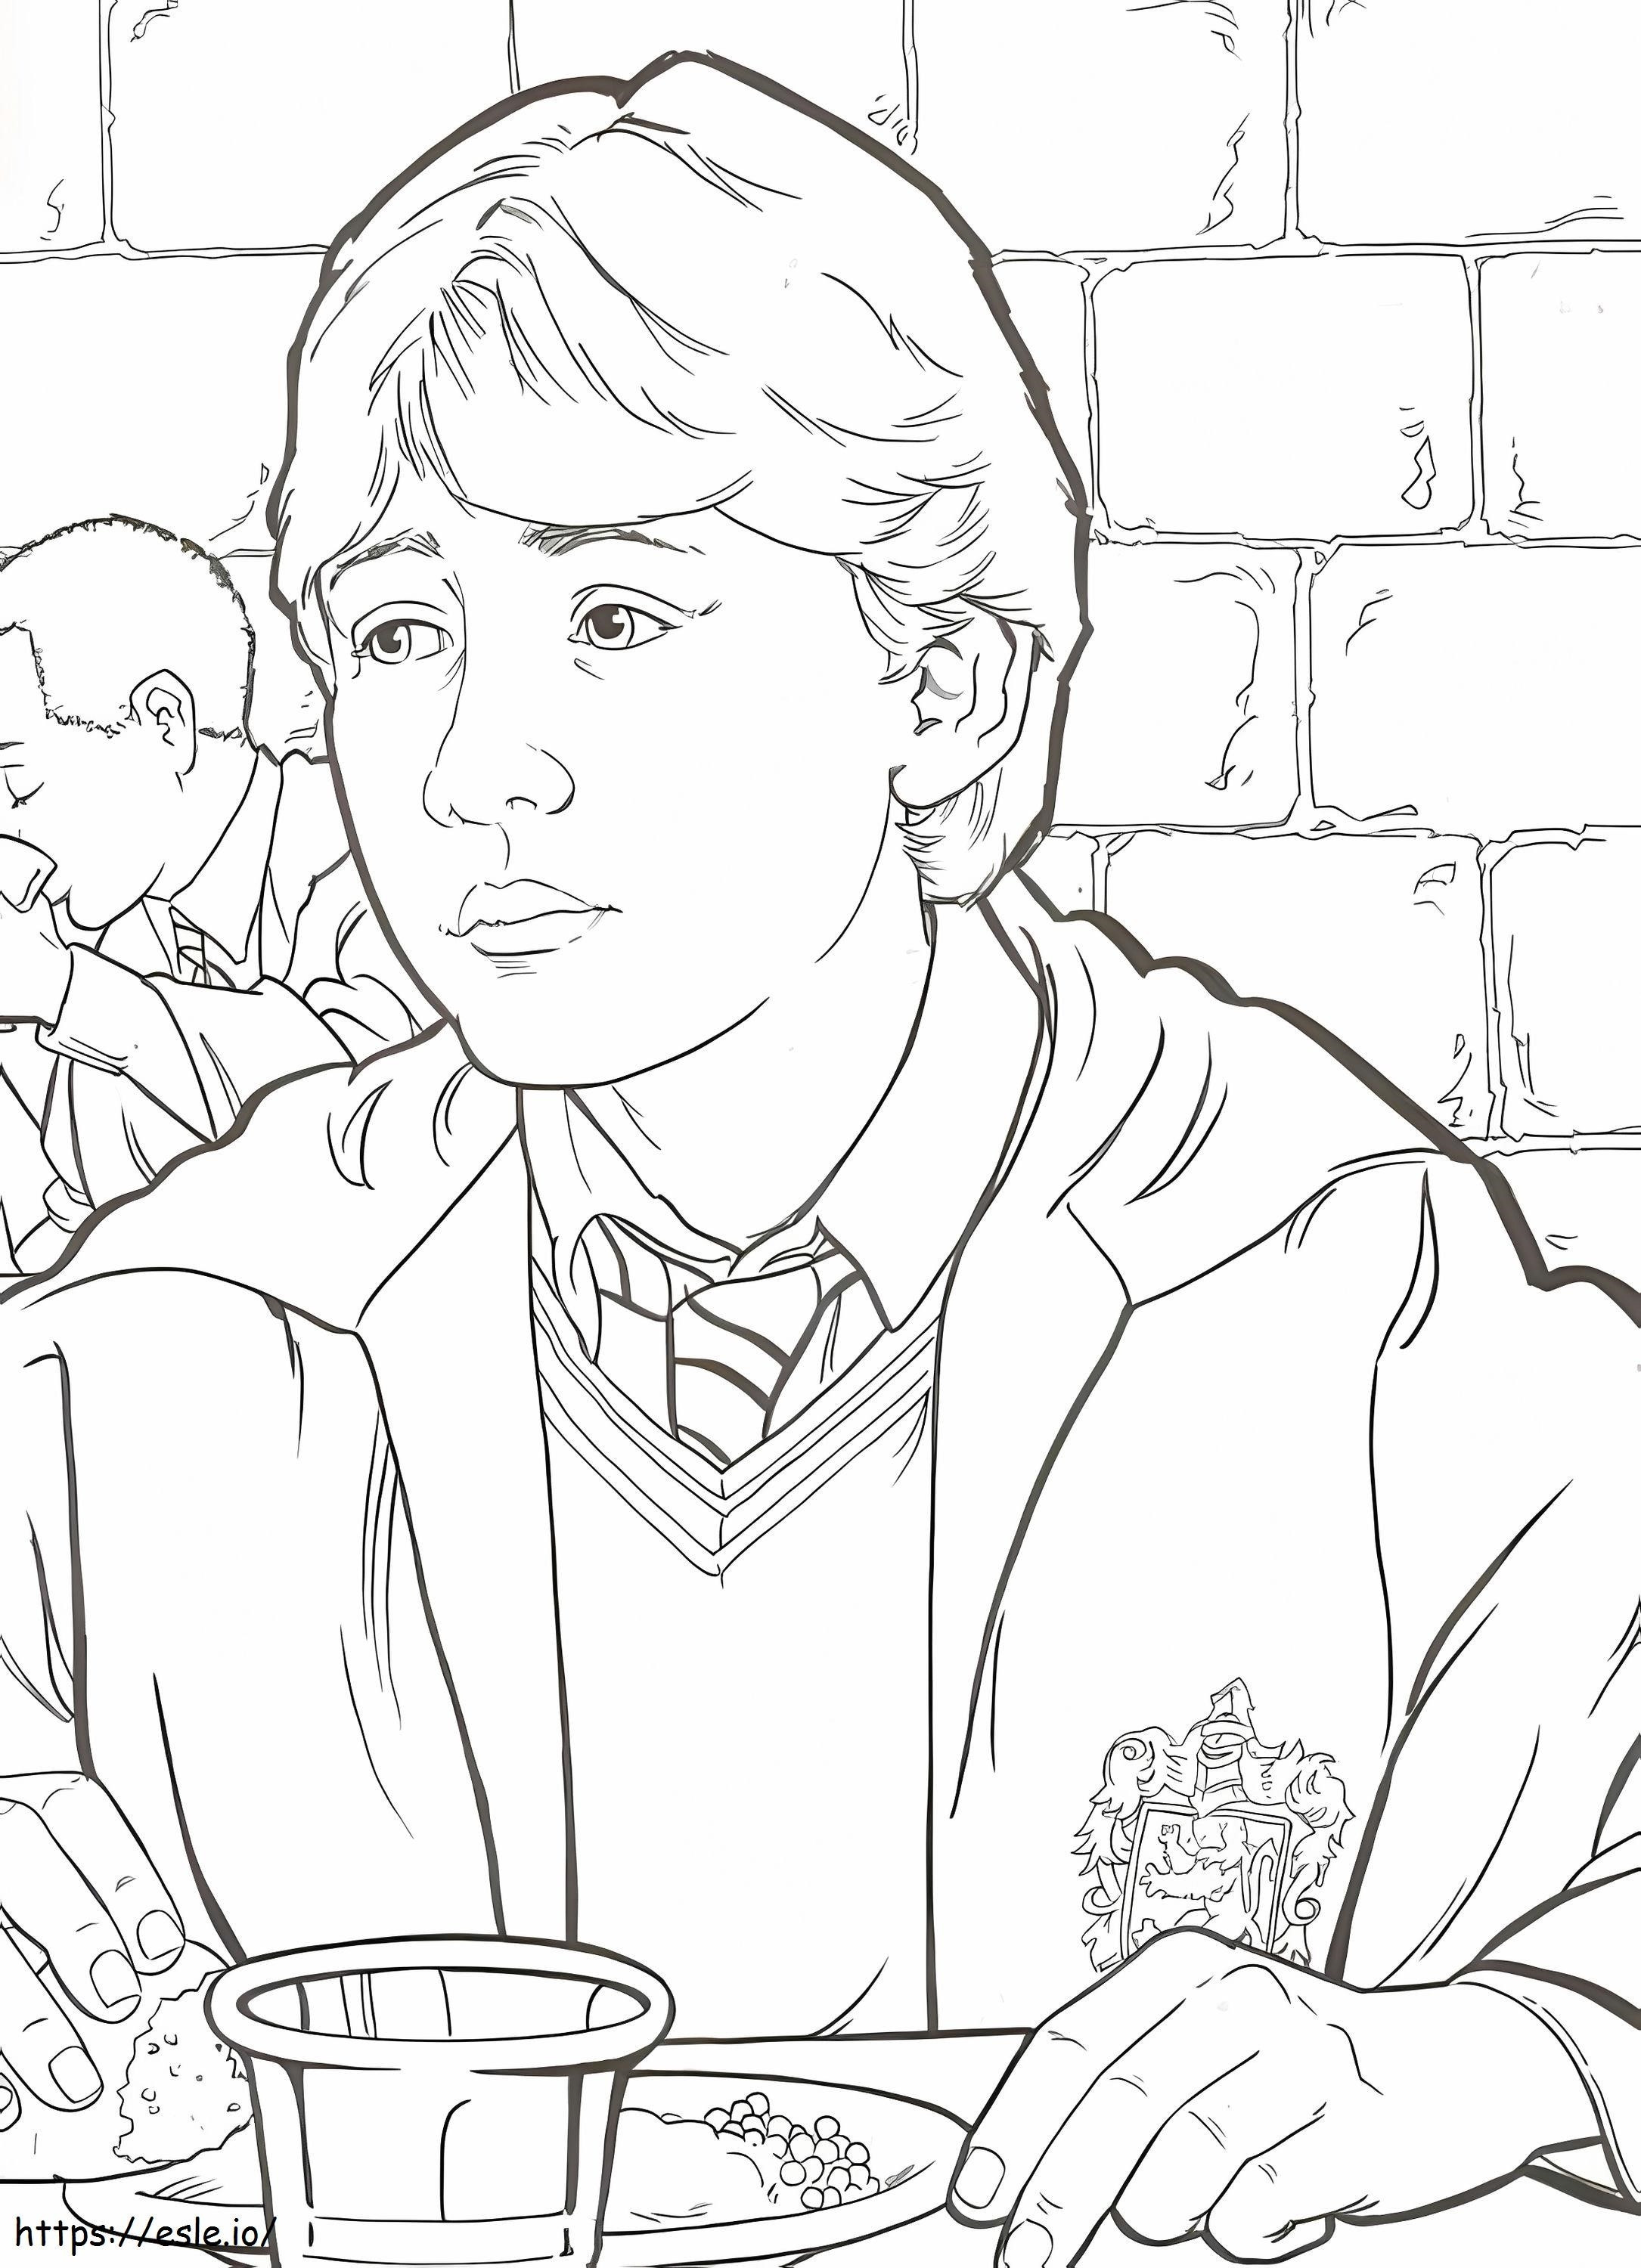 Ron Weasley 3 coloring page